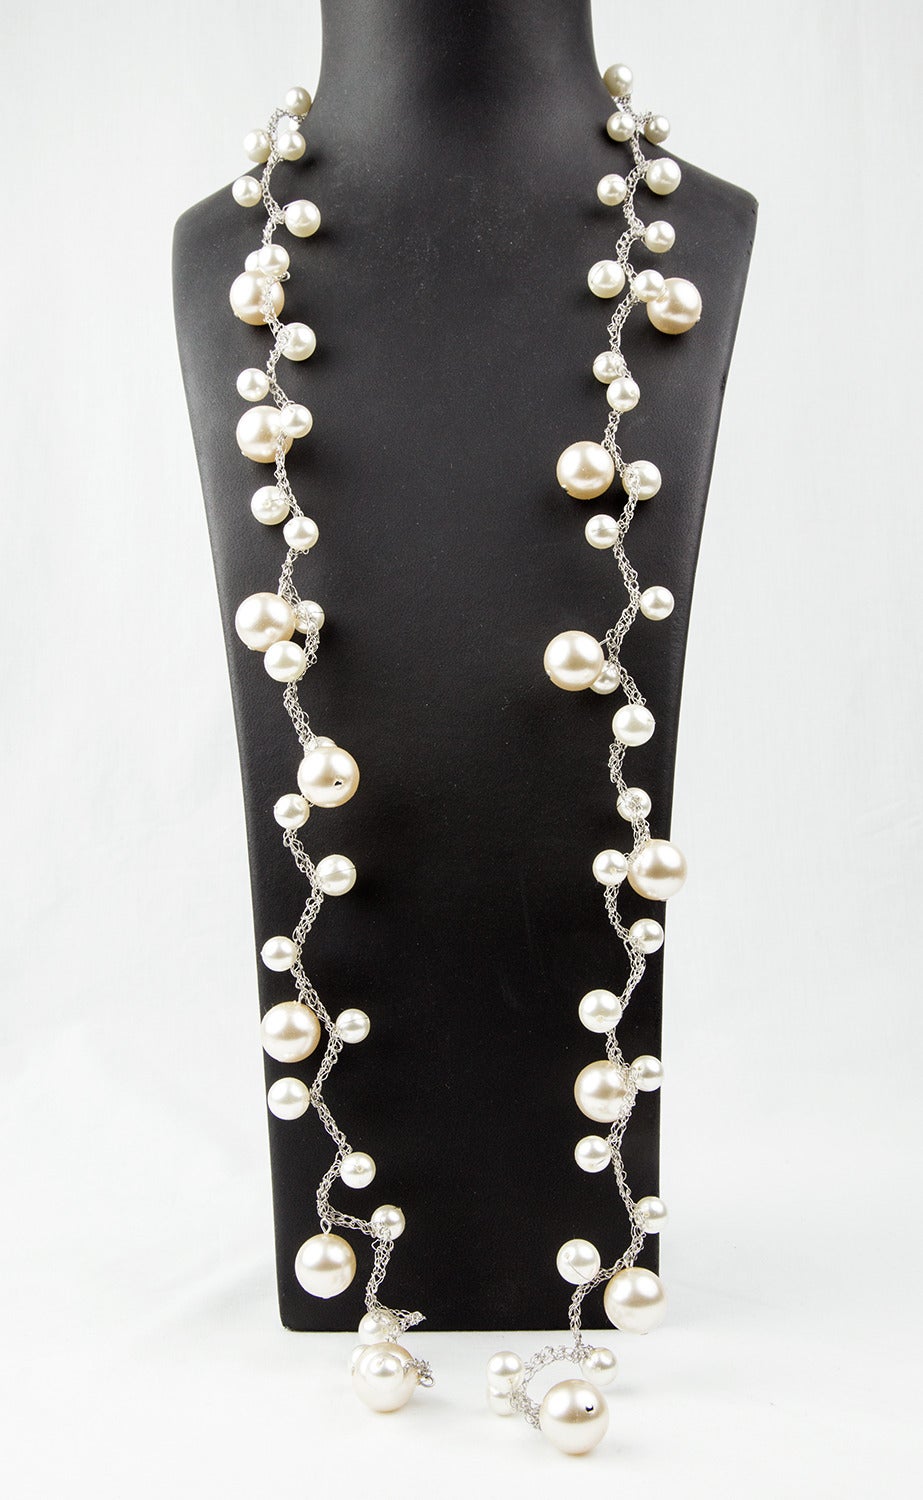 Pearl Magic! Long and elegant faux Pearl Necklace made of graduated round Faux Pearls on braided wire chain; pearls measure approx. large size 18mm; medium 12mm and small 10.5mm; approx. Length of Necklace: 48